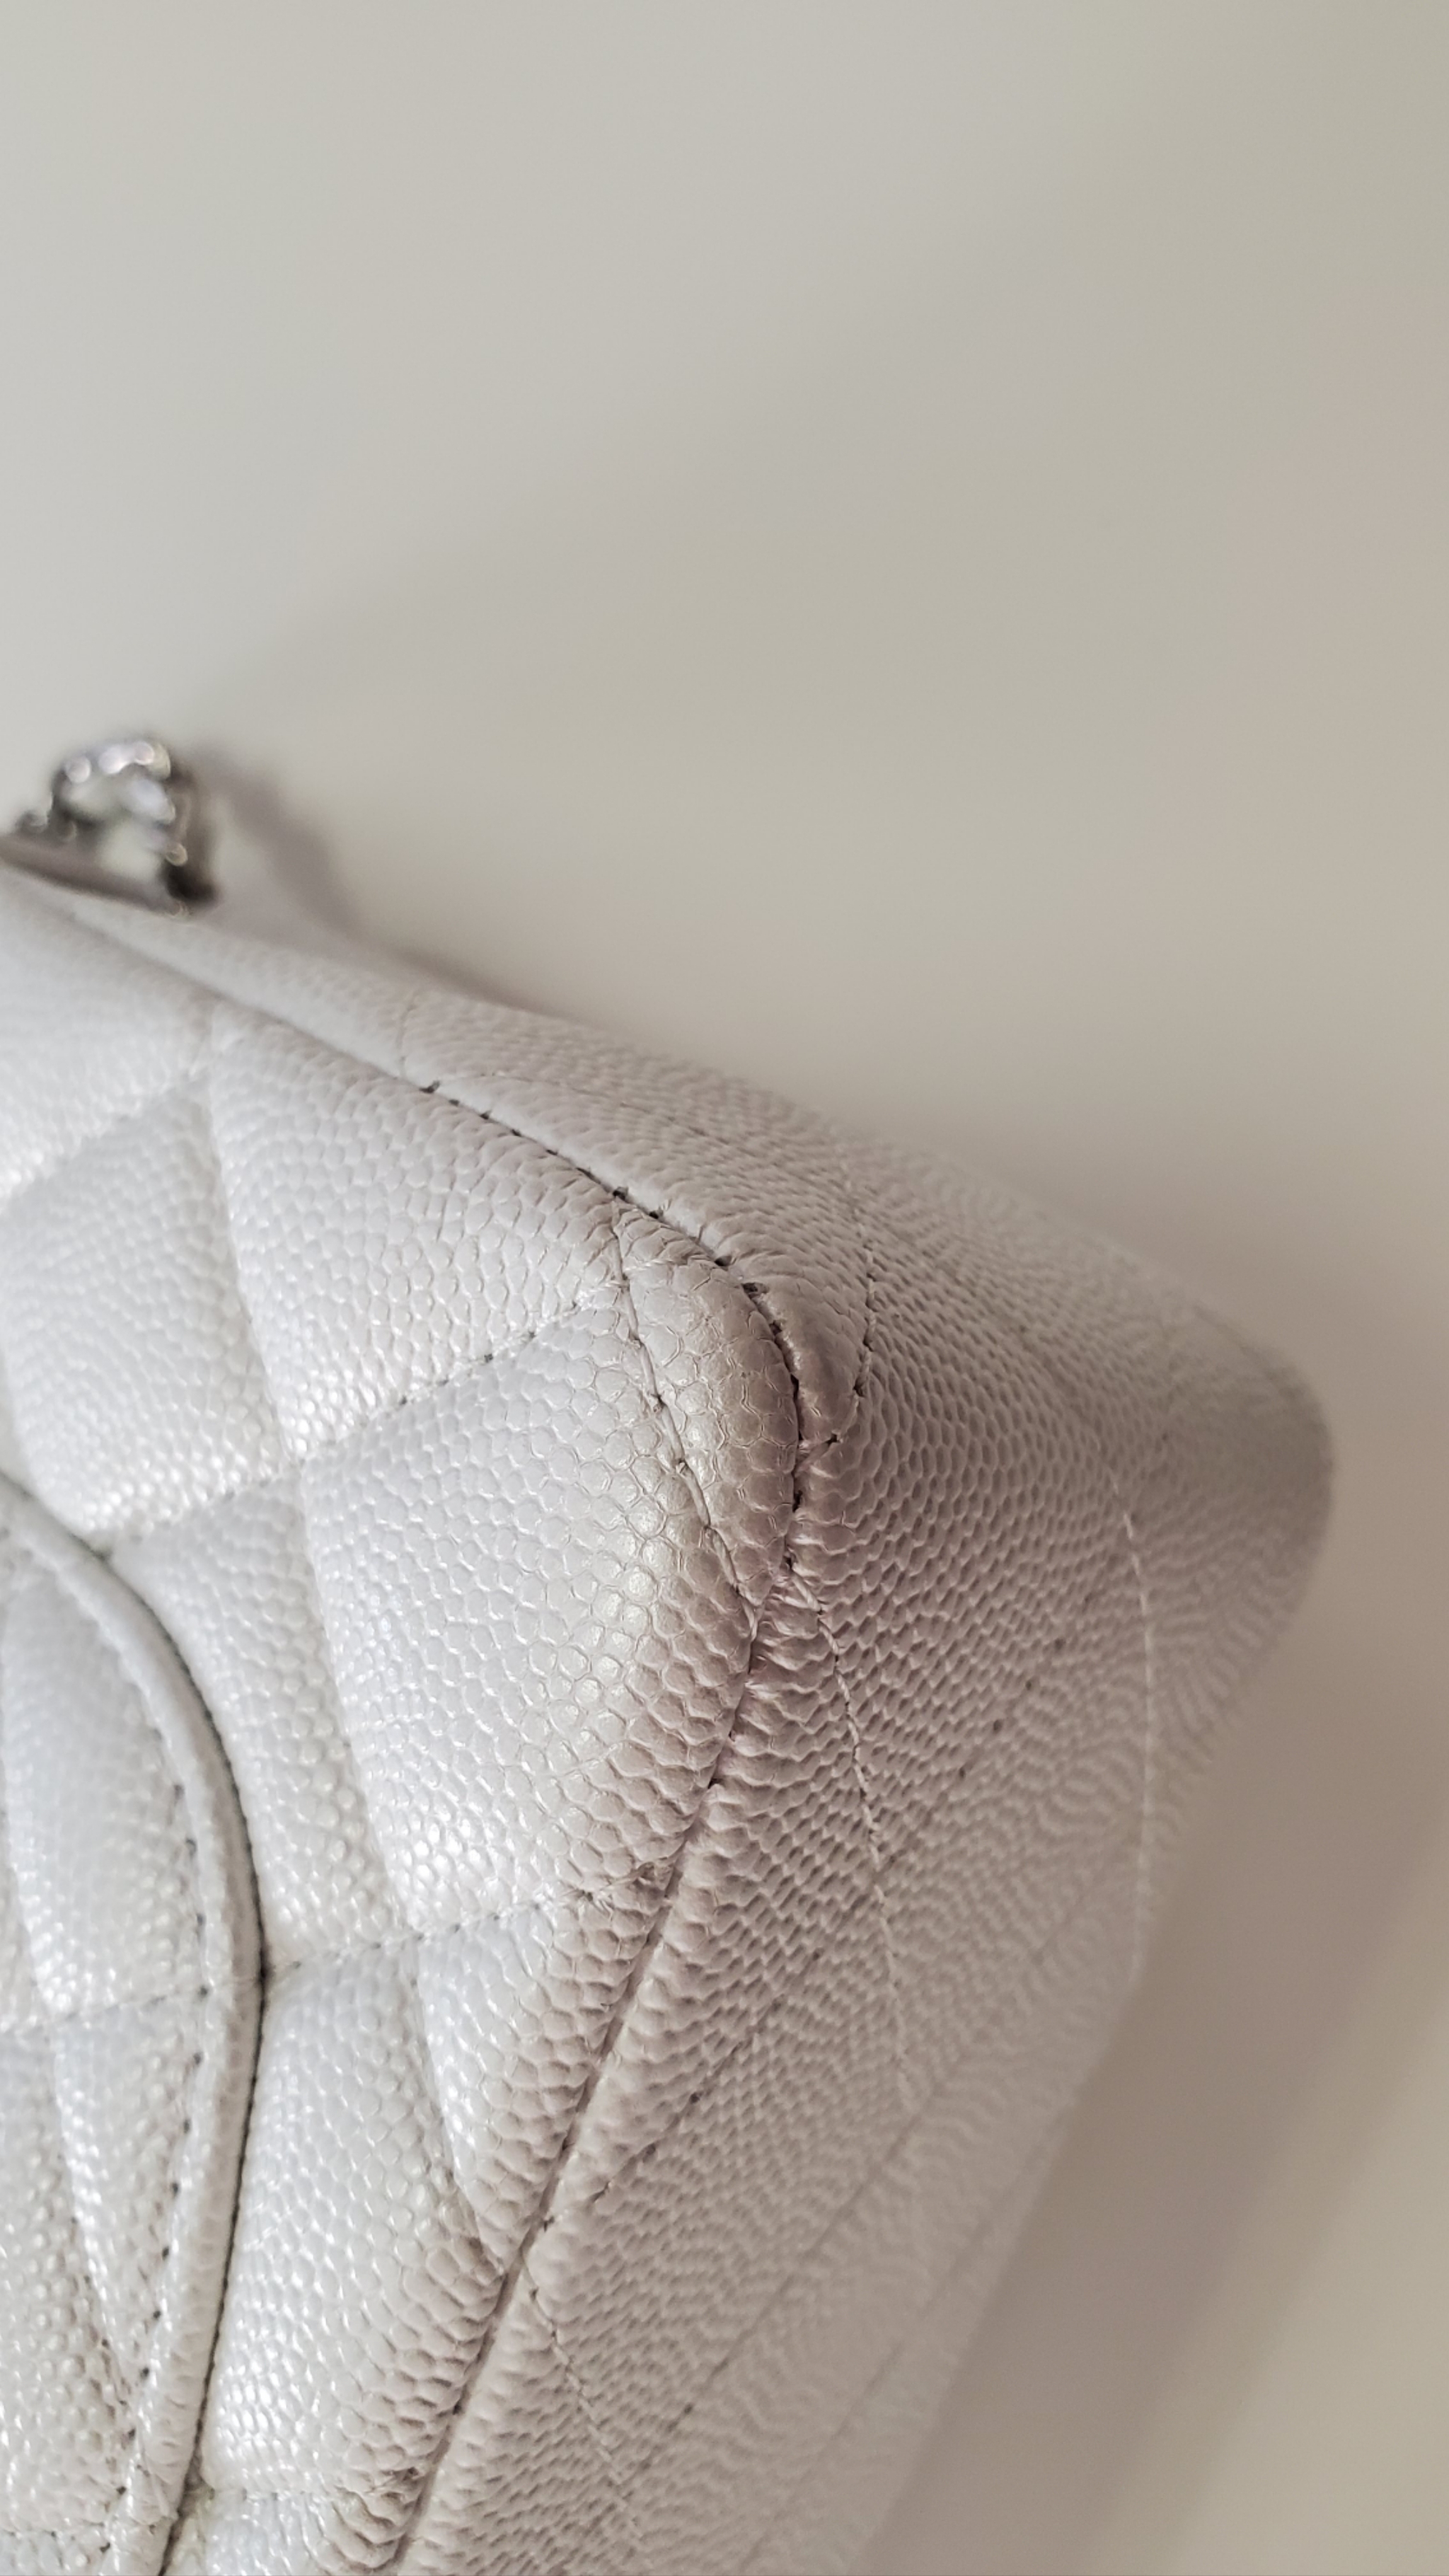 CHANEL Caviar Quilted Mini Top Handle Rectangular Flap White